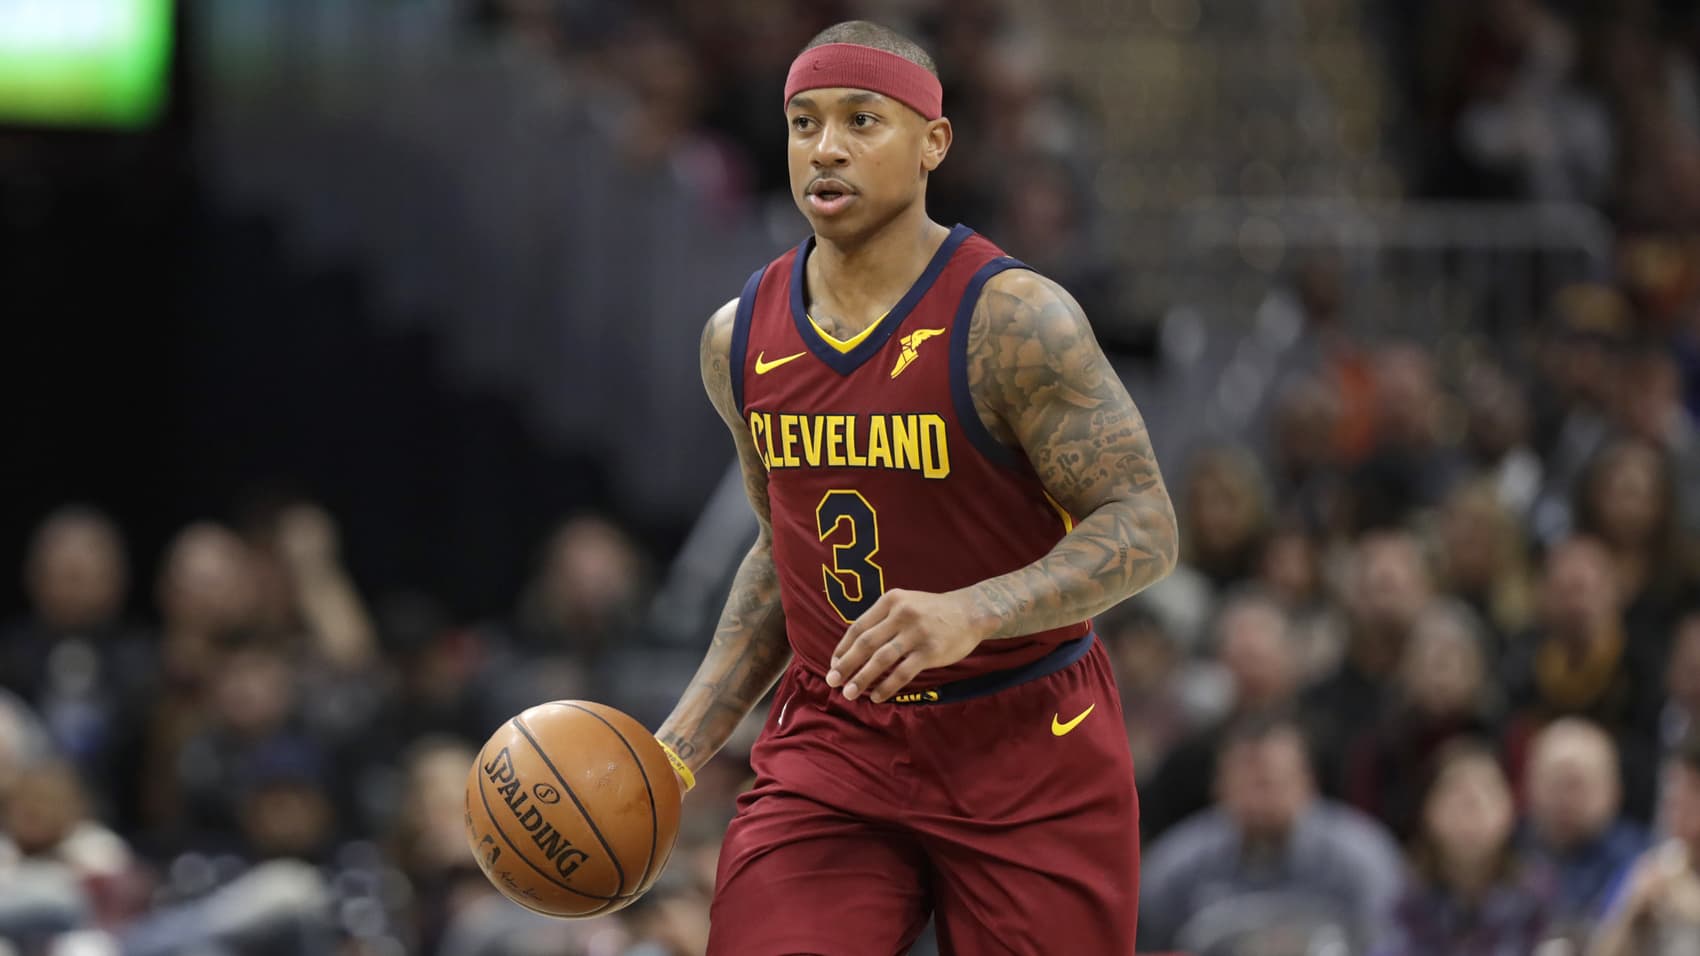 Cleveland Cavaliers' Isaiah Thomas drives in the second half of an NBA basketball game against the Portland Trail Blazers, Tuesday, Jan. 2, 2018, in Cleveland. (AP Photo/Tony Dejak)